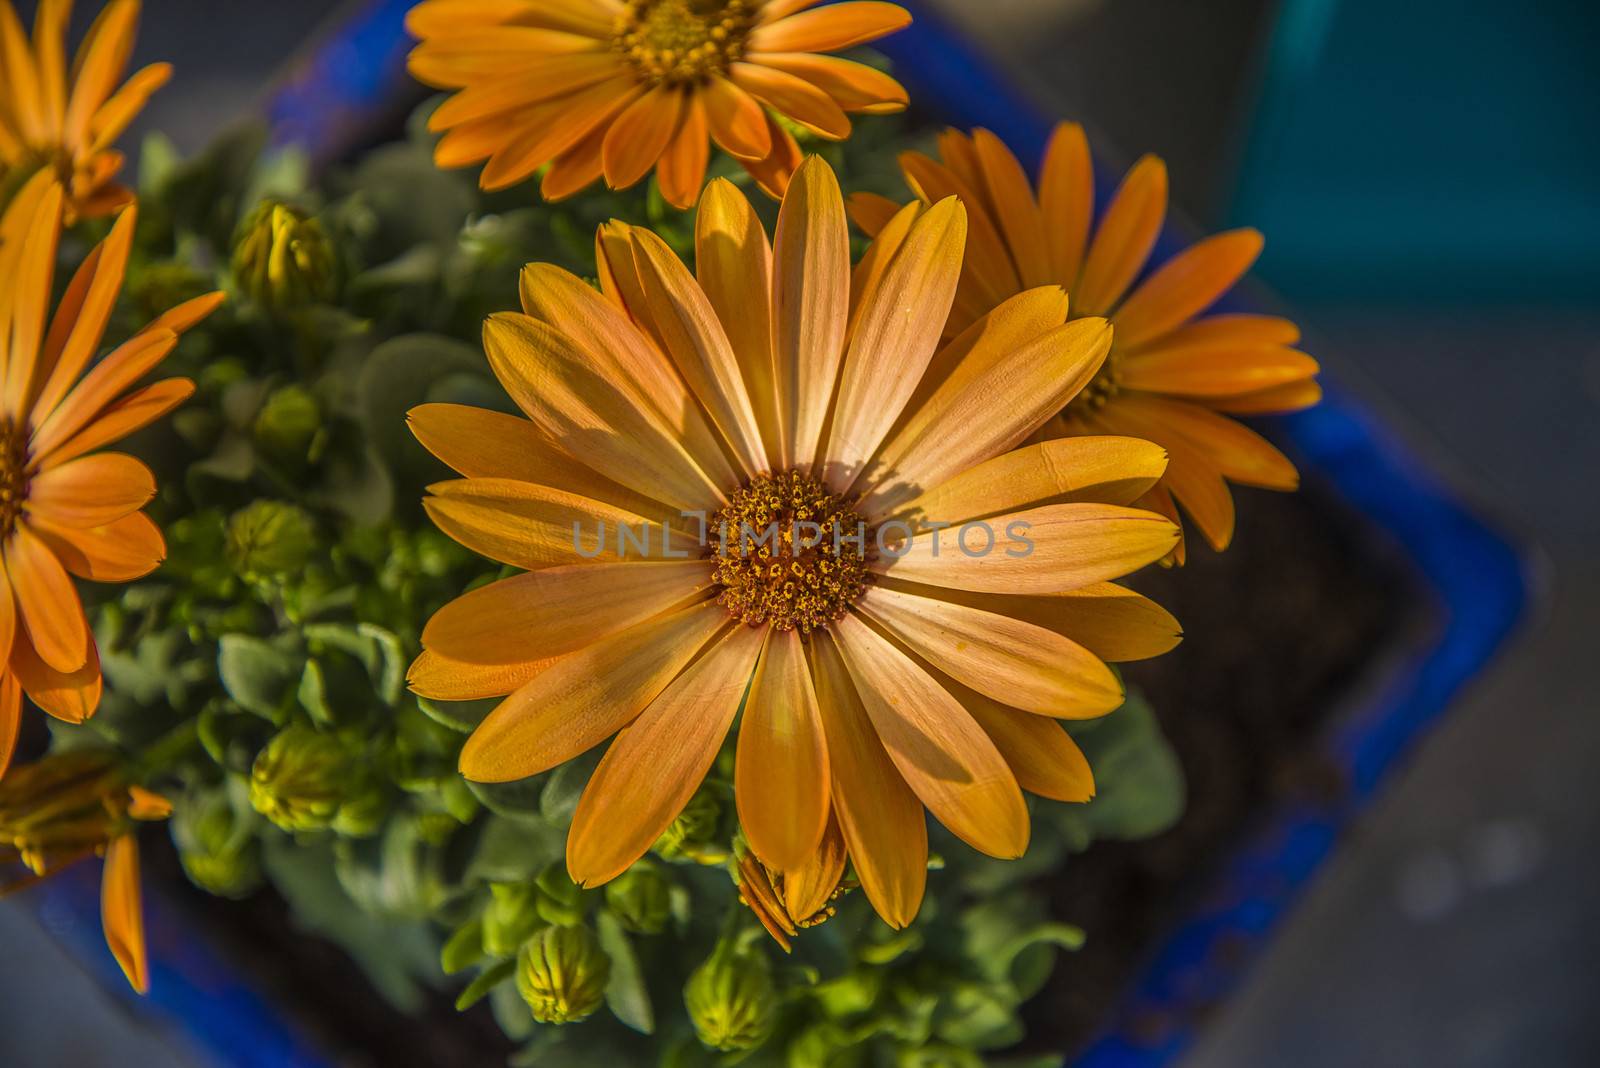 The picture is shot in a flower pot at the backyard of my home in Halden, Norway.